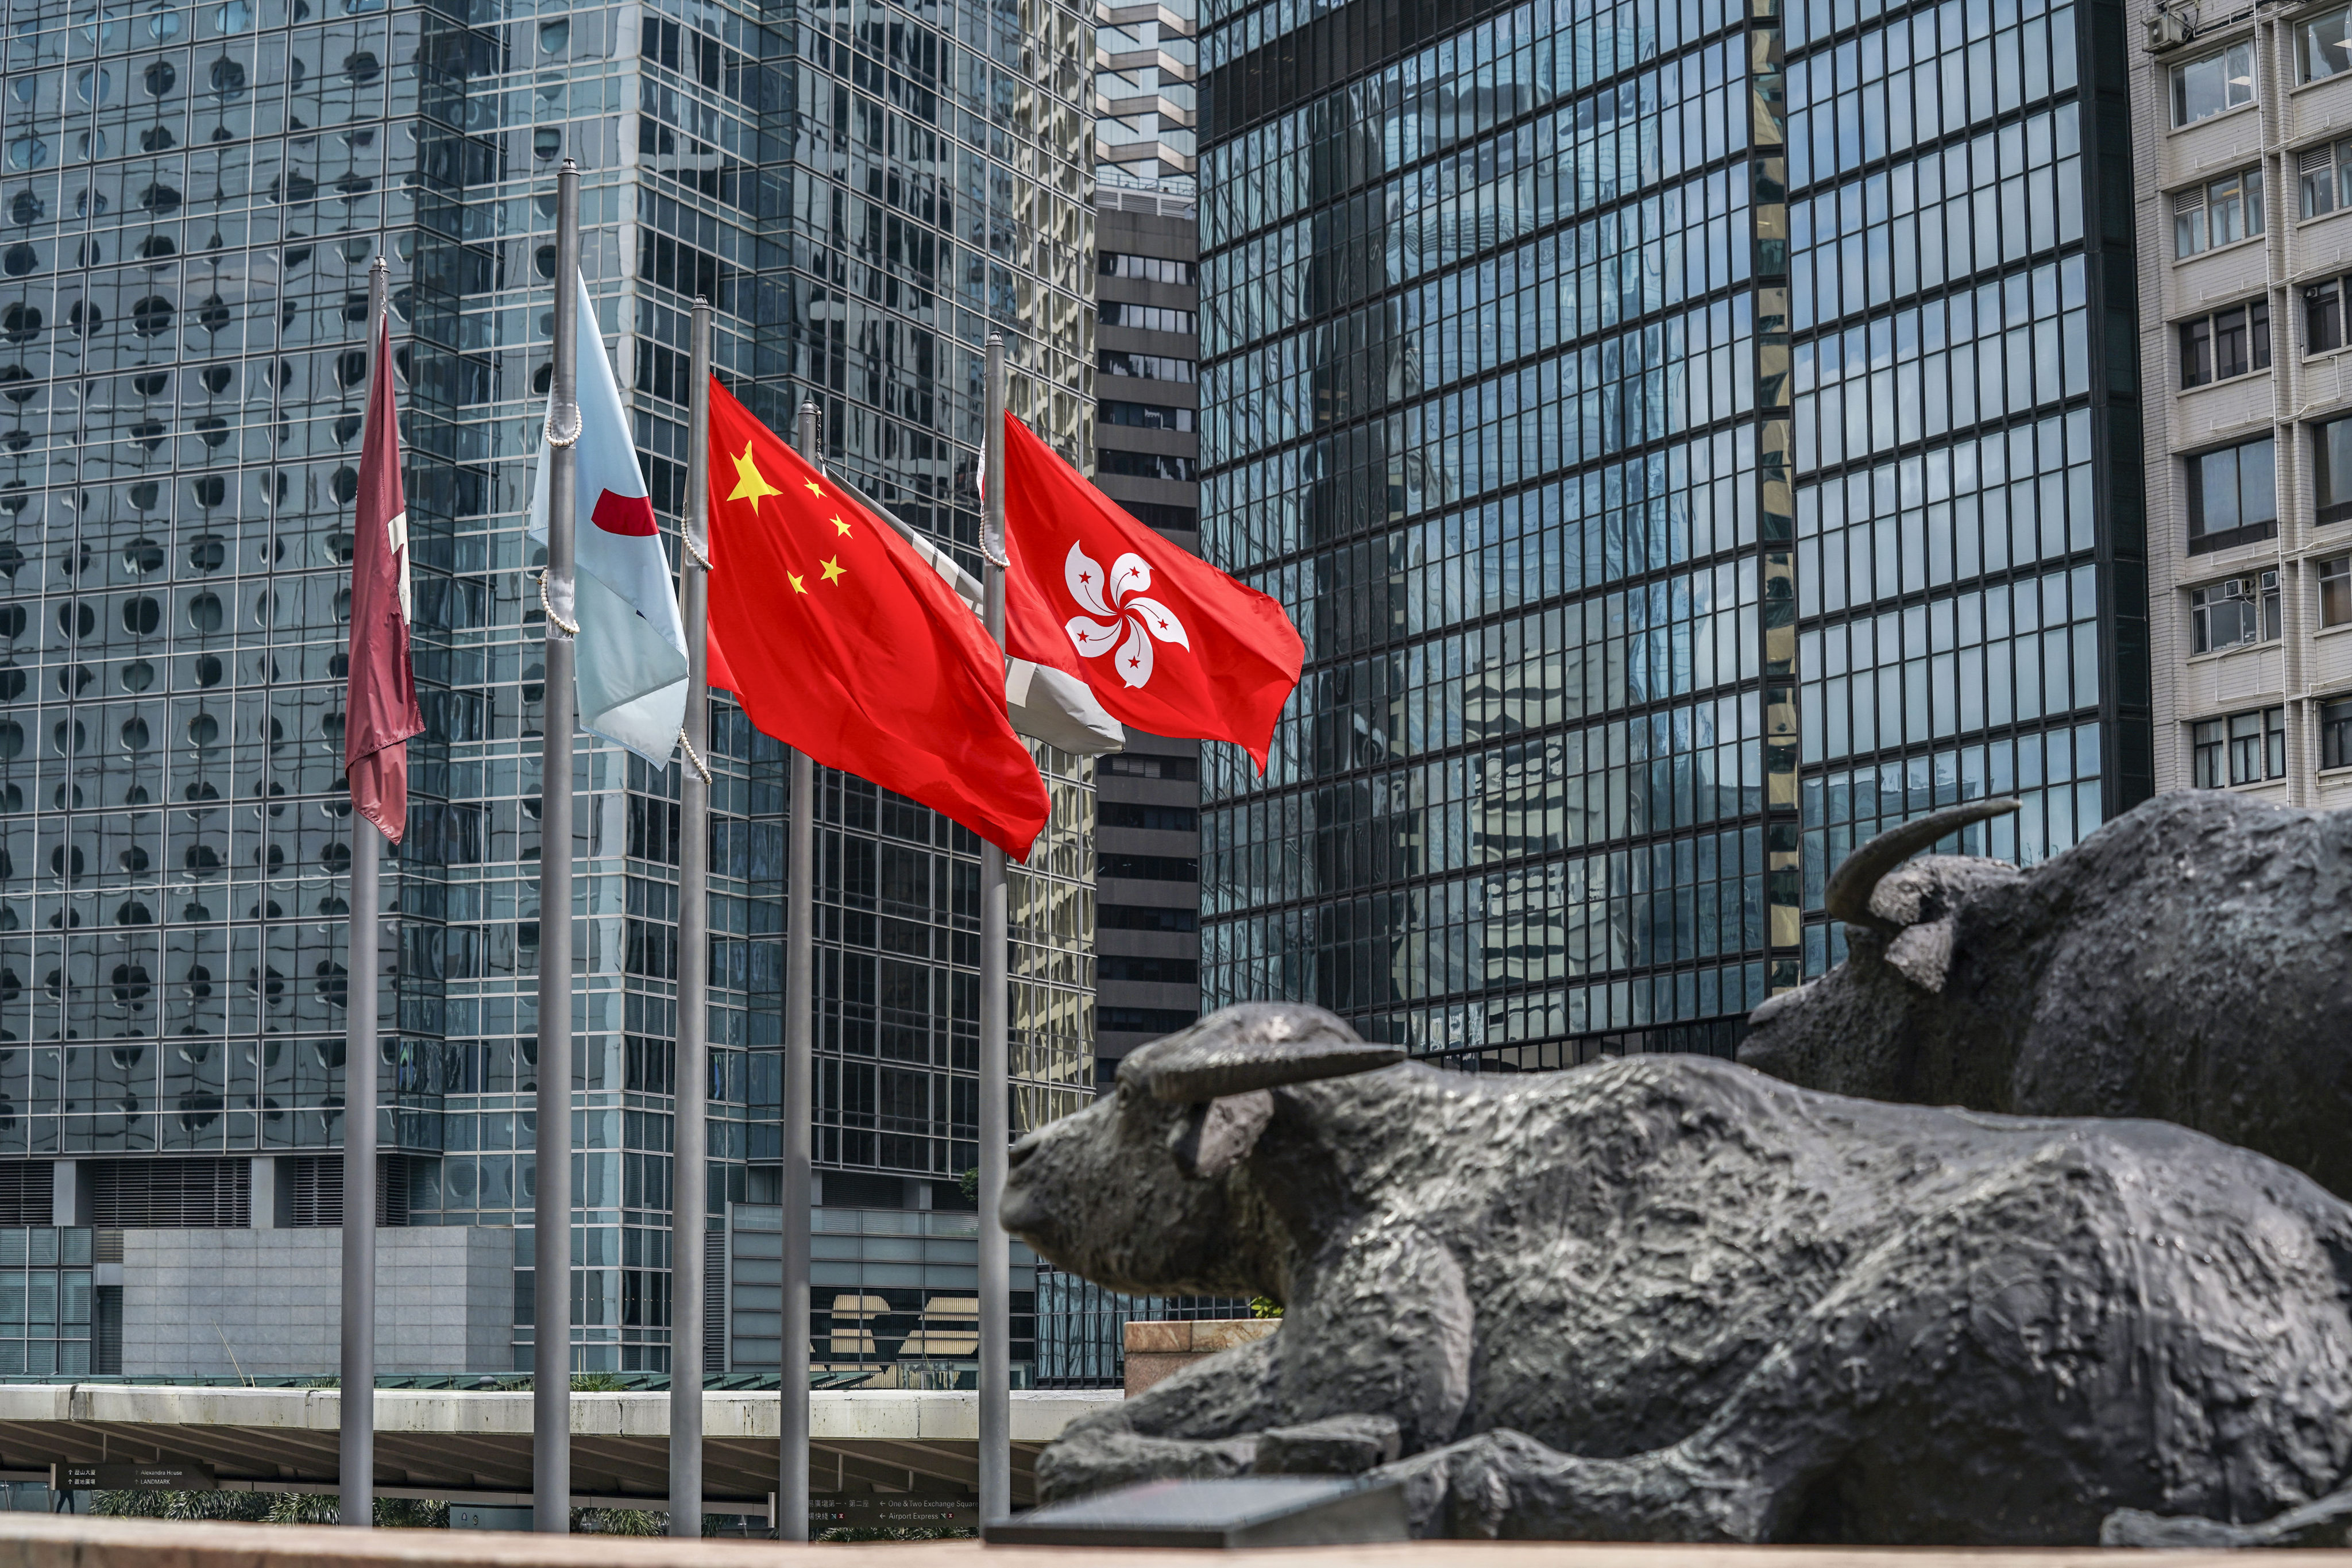 The flag of the Hong Kong Special Administrative Region, right, flies alongside the flag of China outside the Exchange Square complex, which houses the Hong Kong Stock Exchange, on May 29, 2020. Photo: Bloomberg